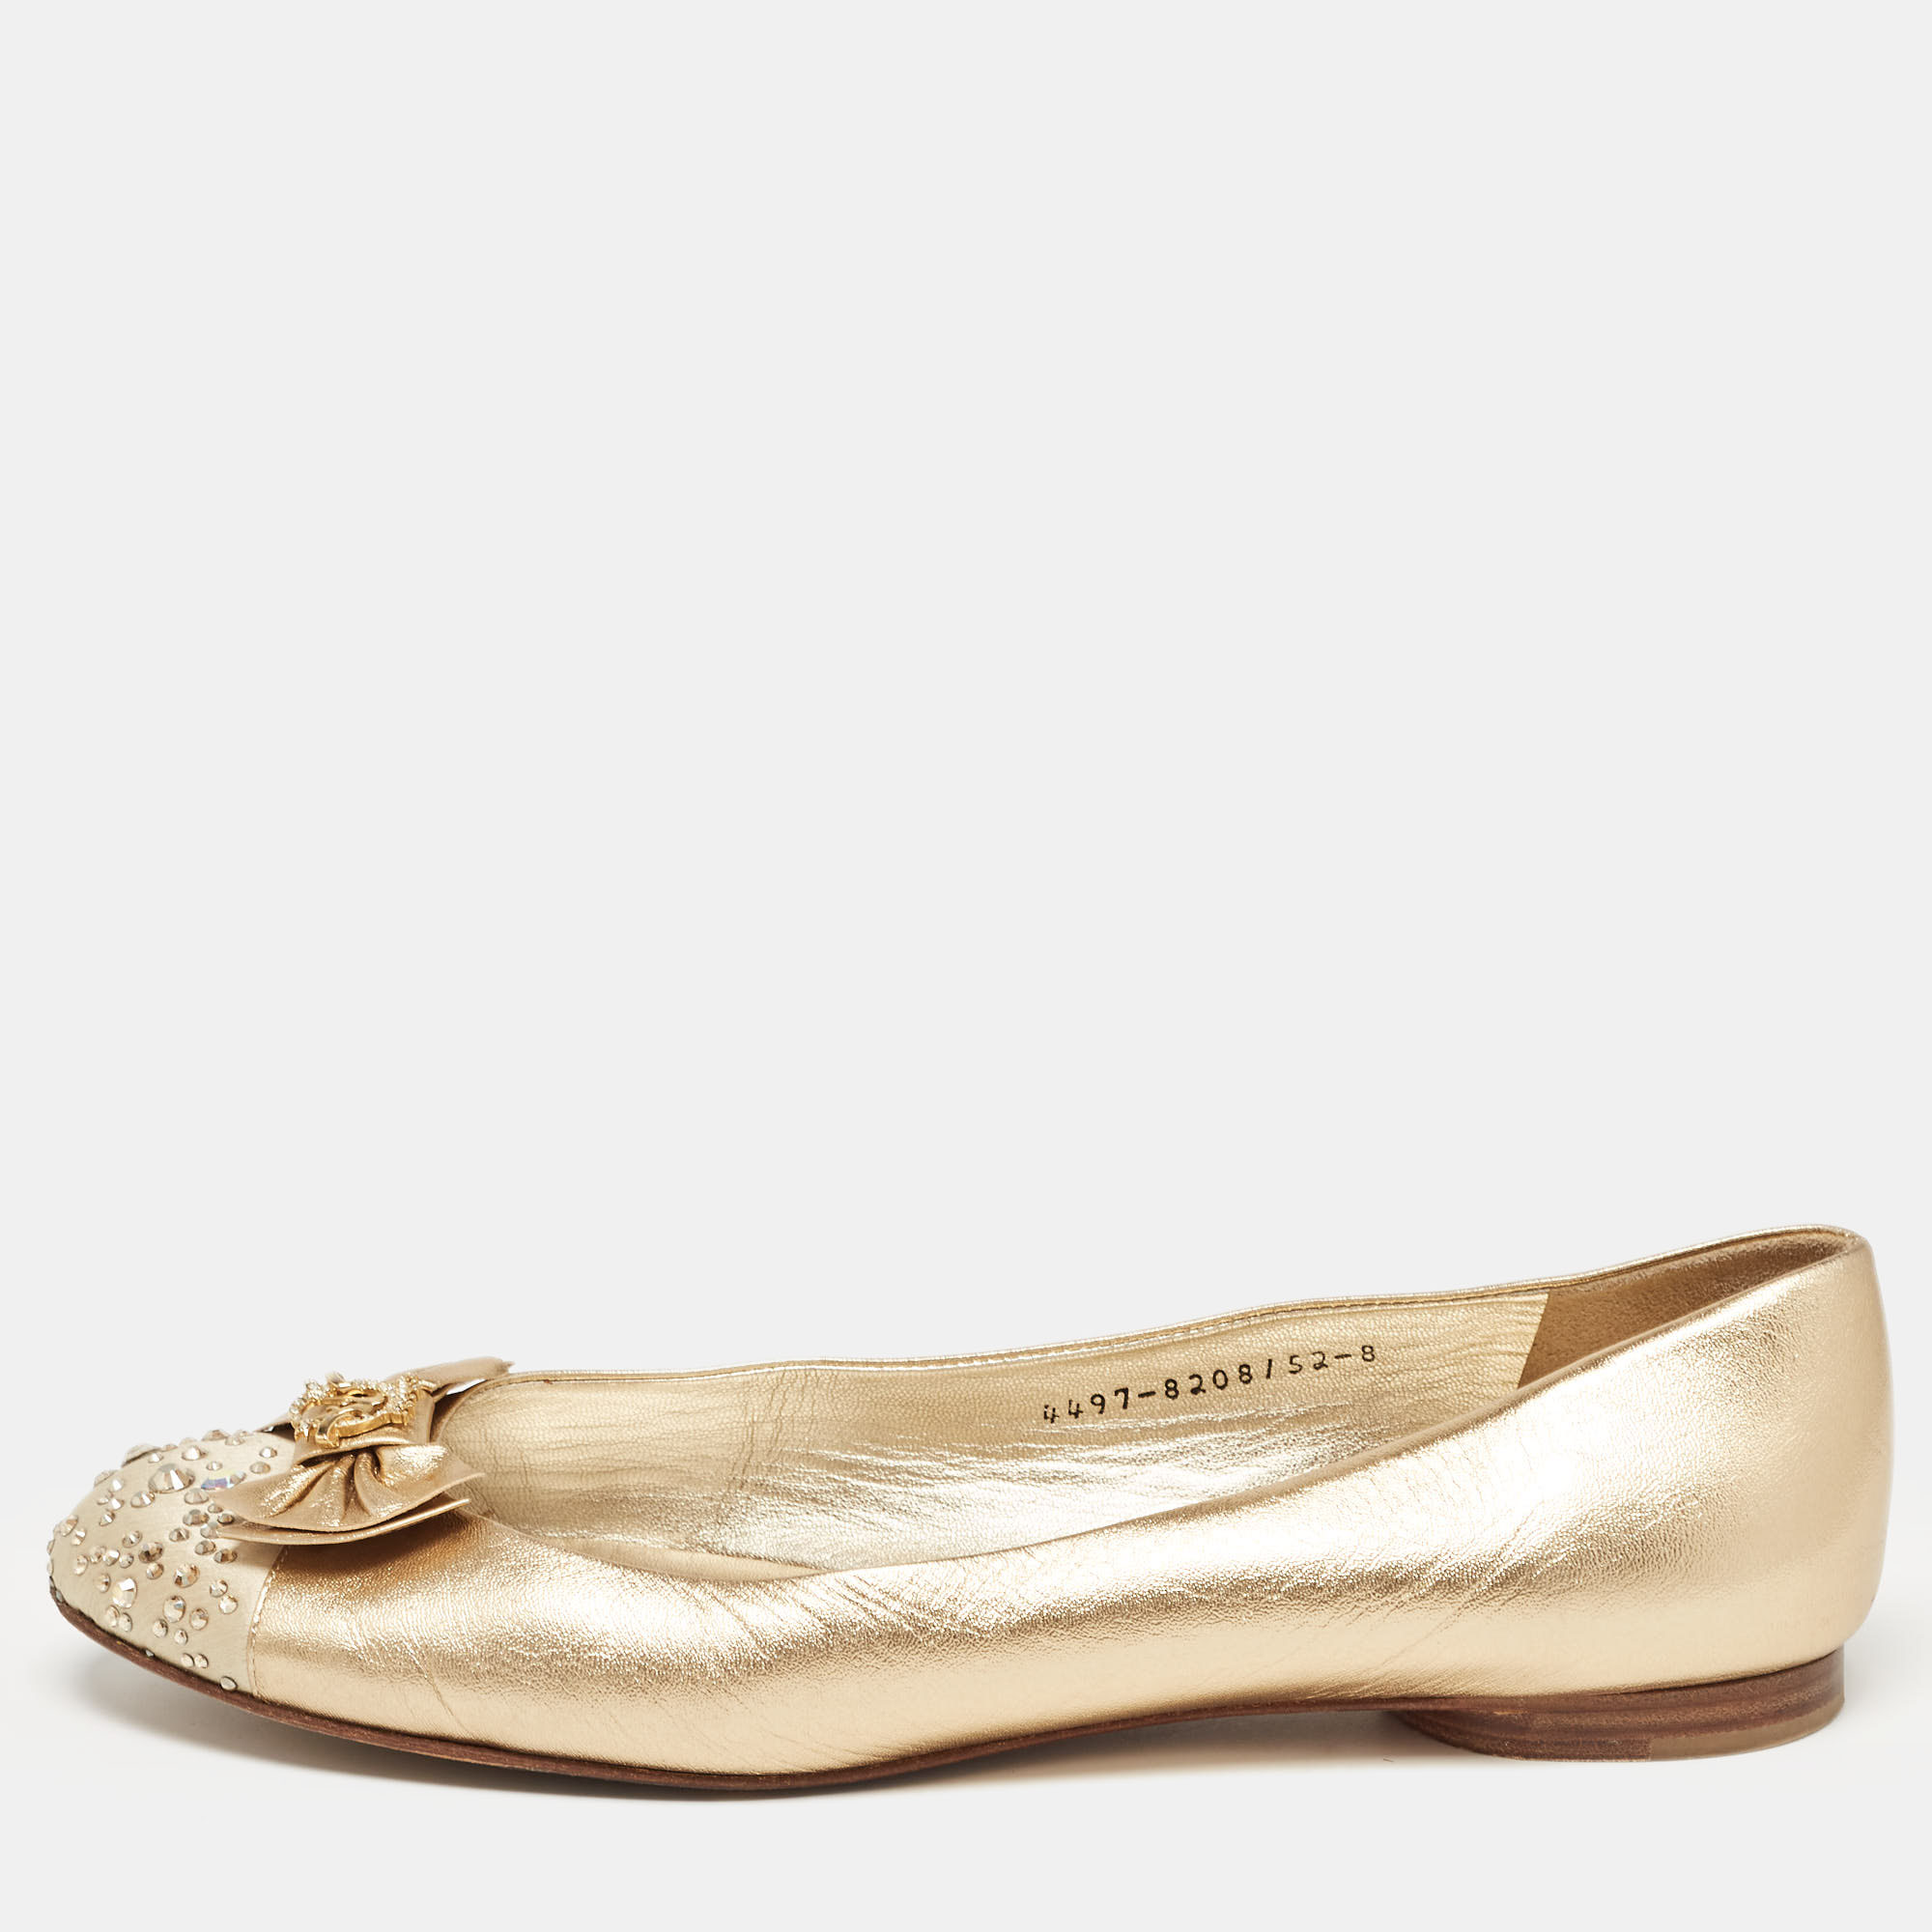 Gina gold leather and crystal embellished satin cap toe bow ballet flats size 41